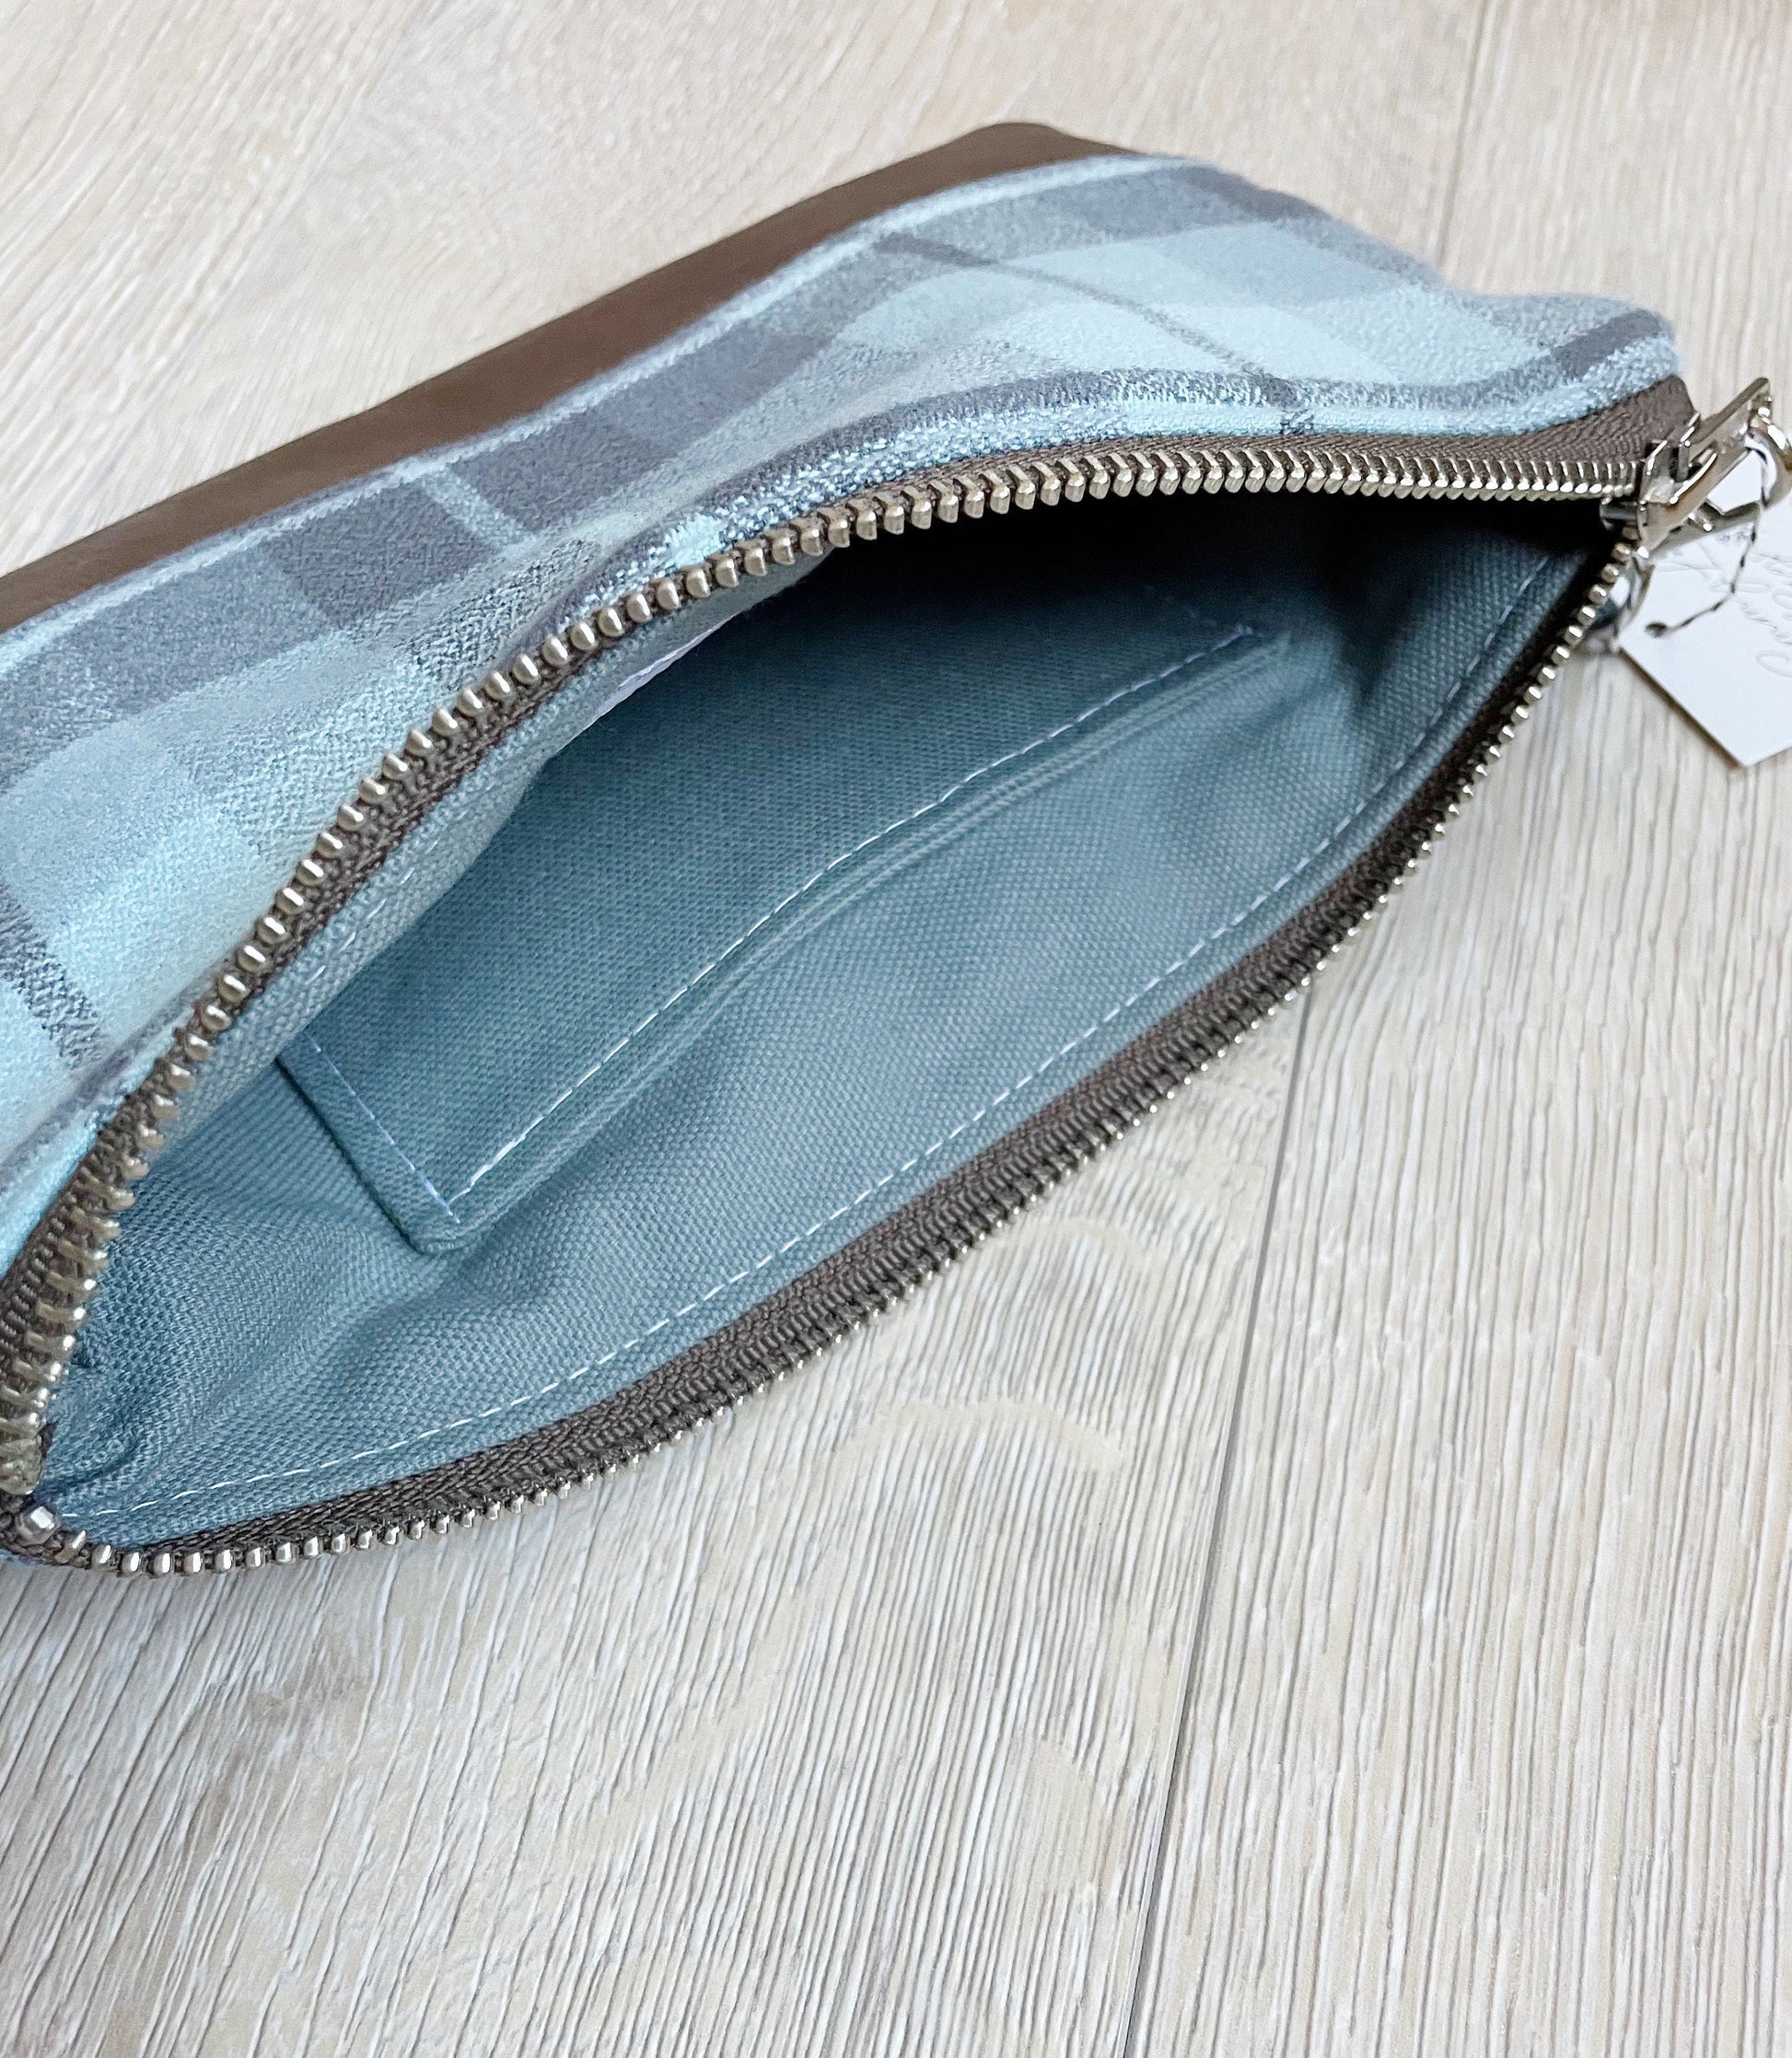 Blue and gray flannel wristlet with brown vinyl along the bottom, closed with a silver zipper. matching flannel wrist strap. lining is gray with a slip pocket for cards